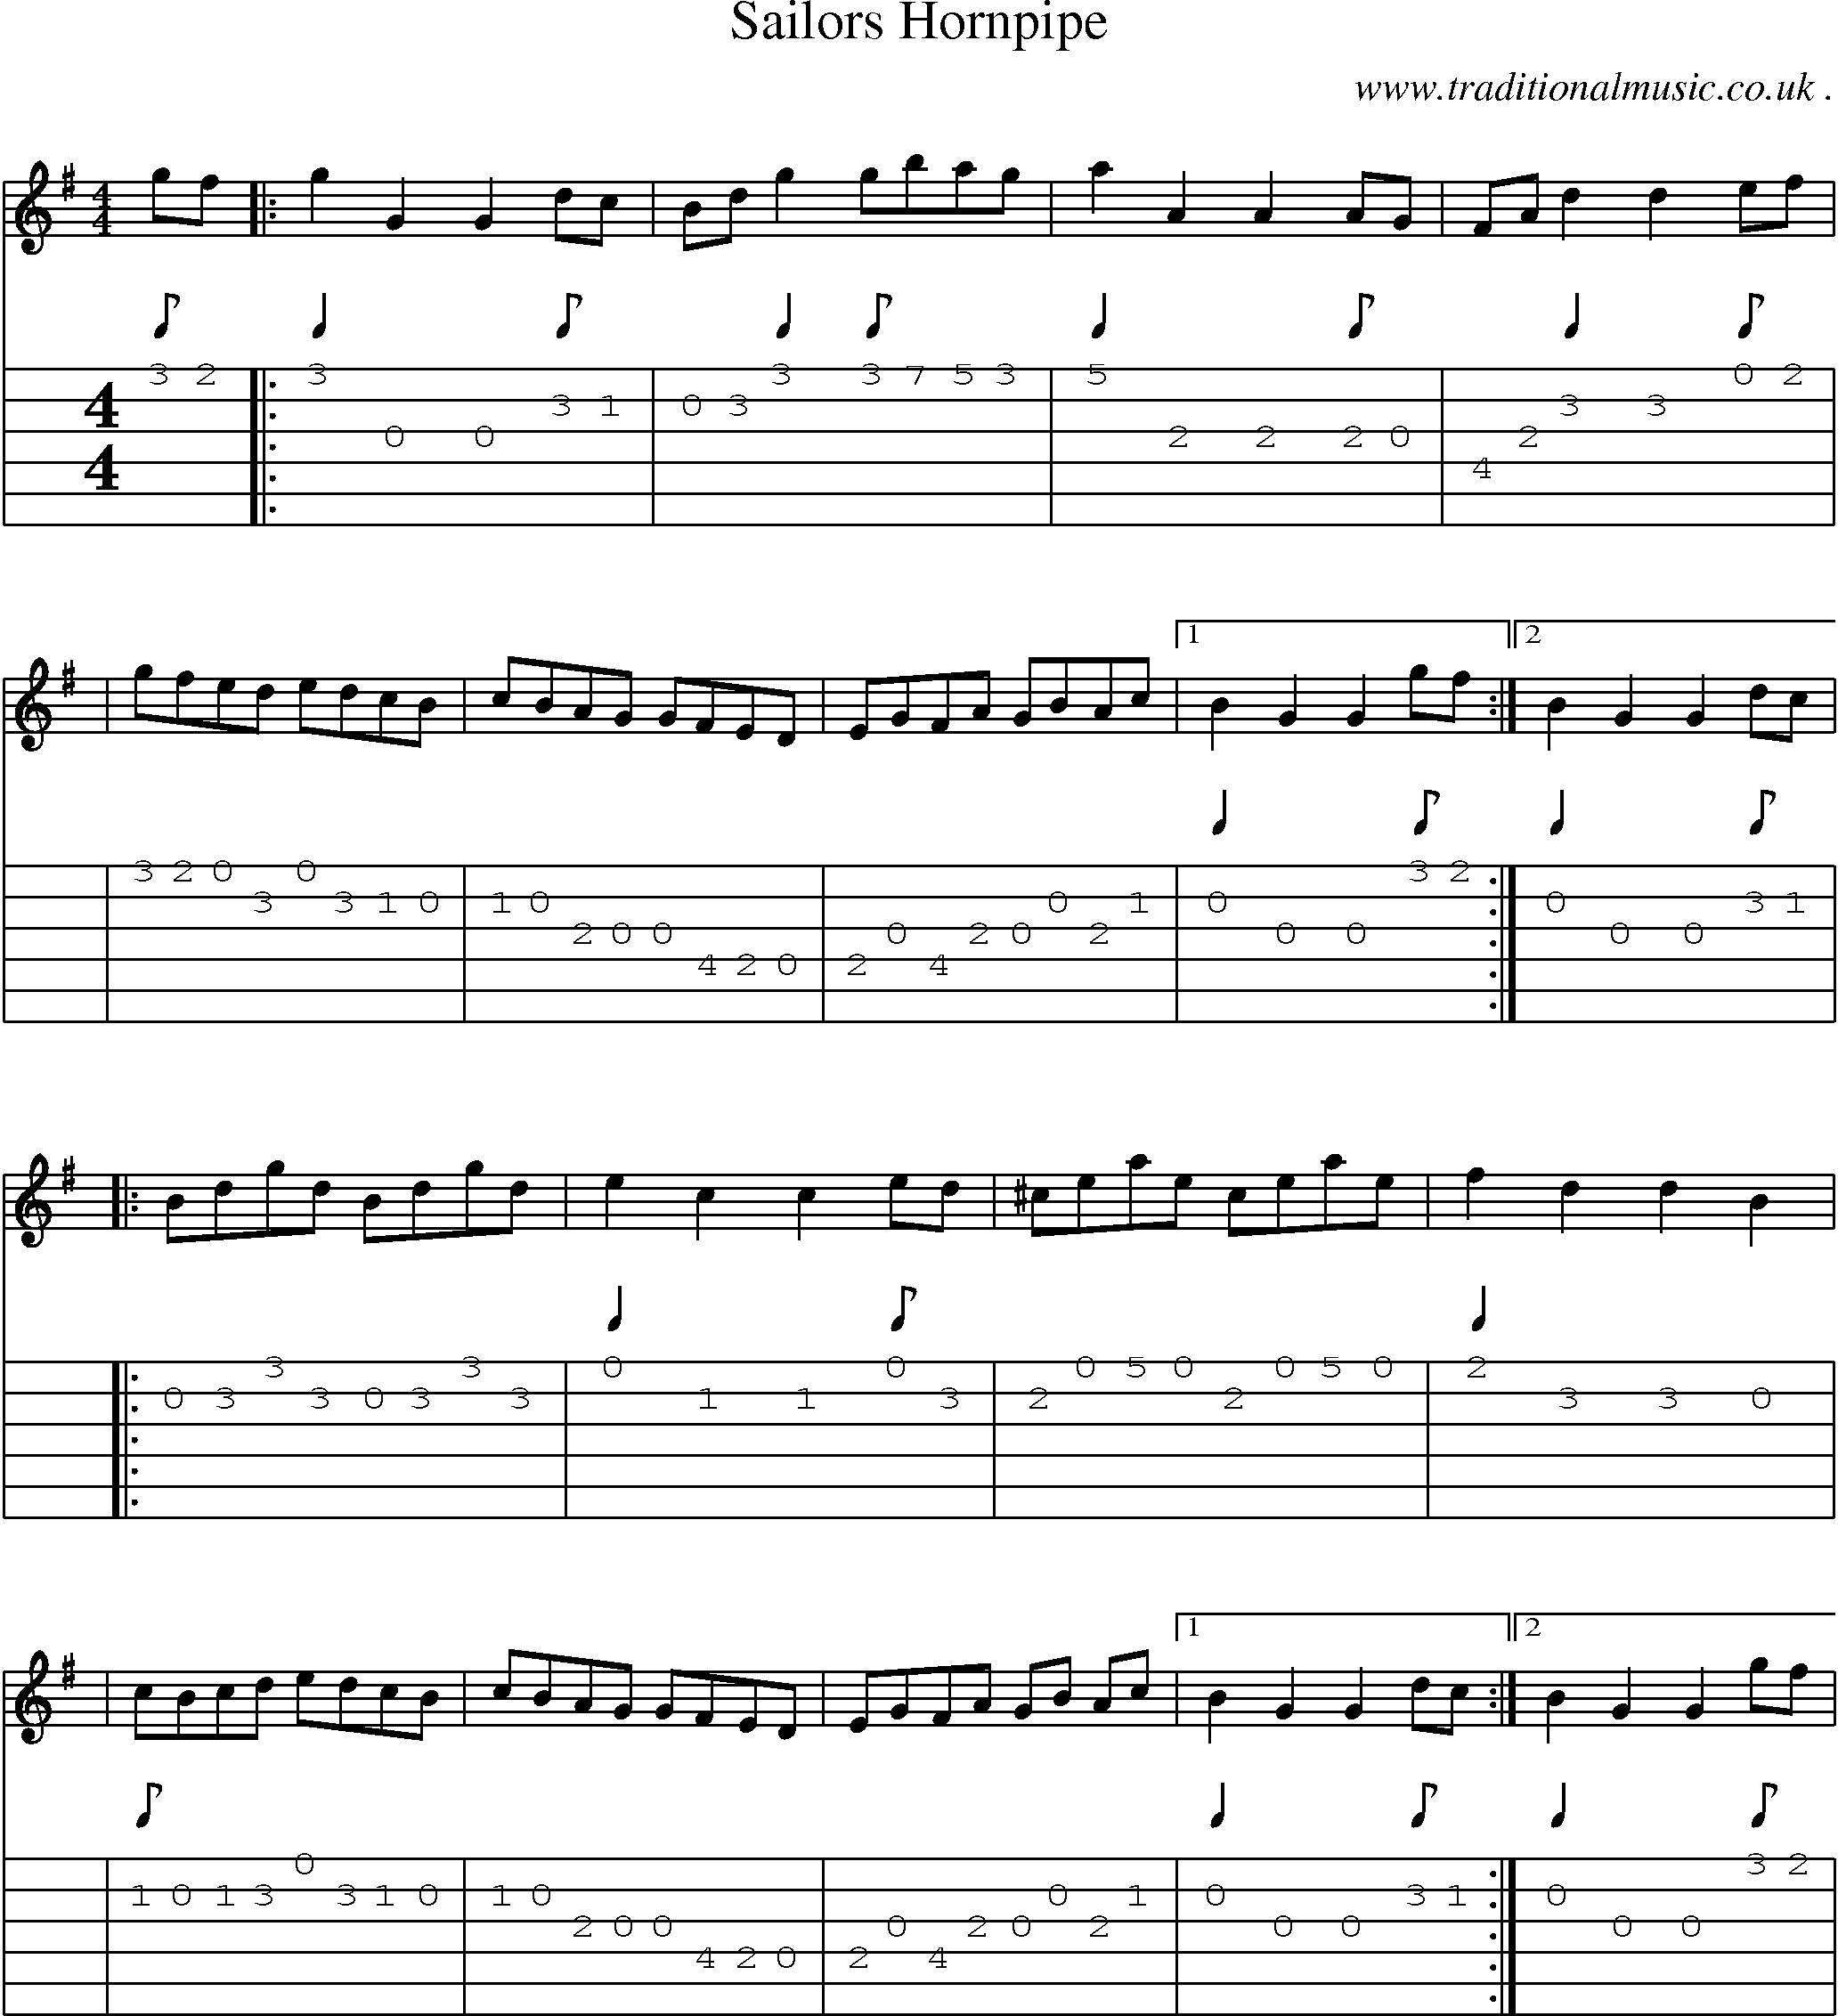 Sheet-Music and Guitar Tabs for Sailors Hornpipe